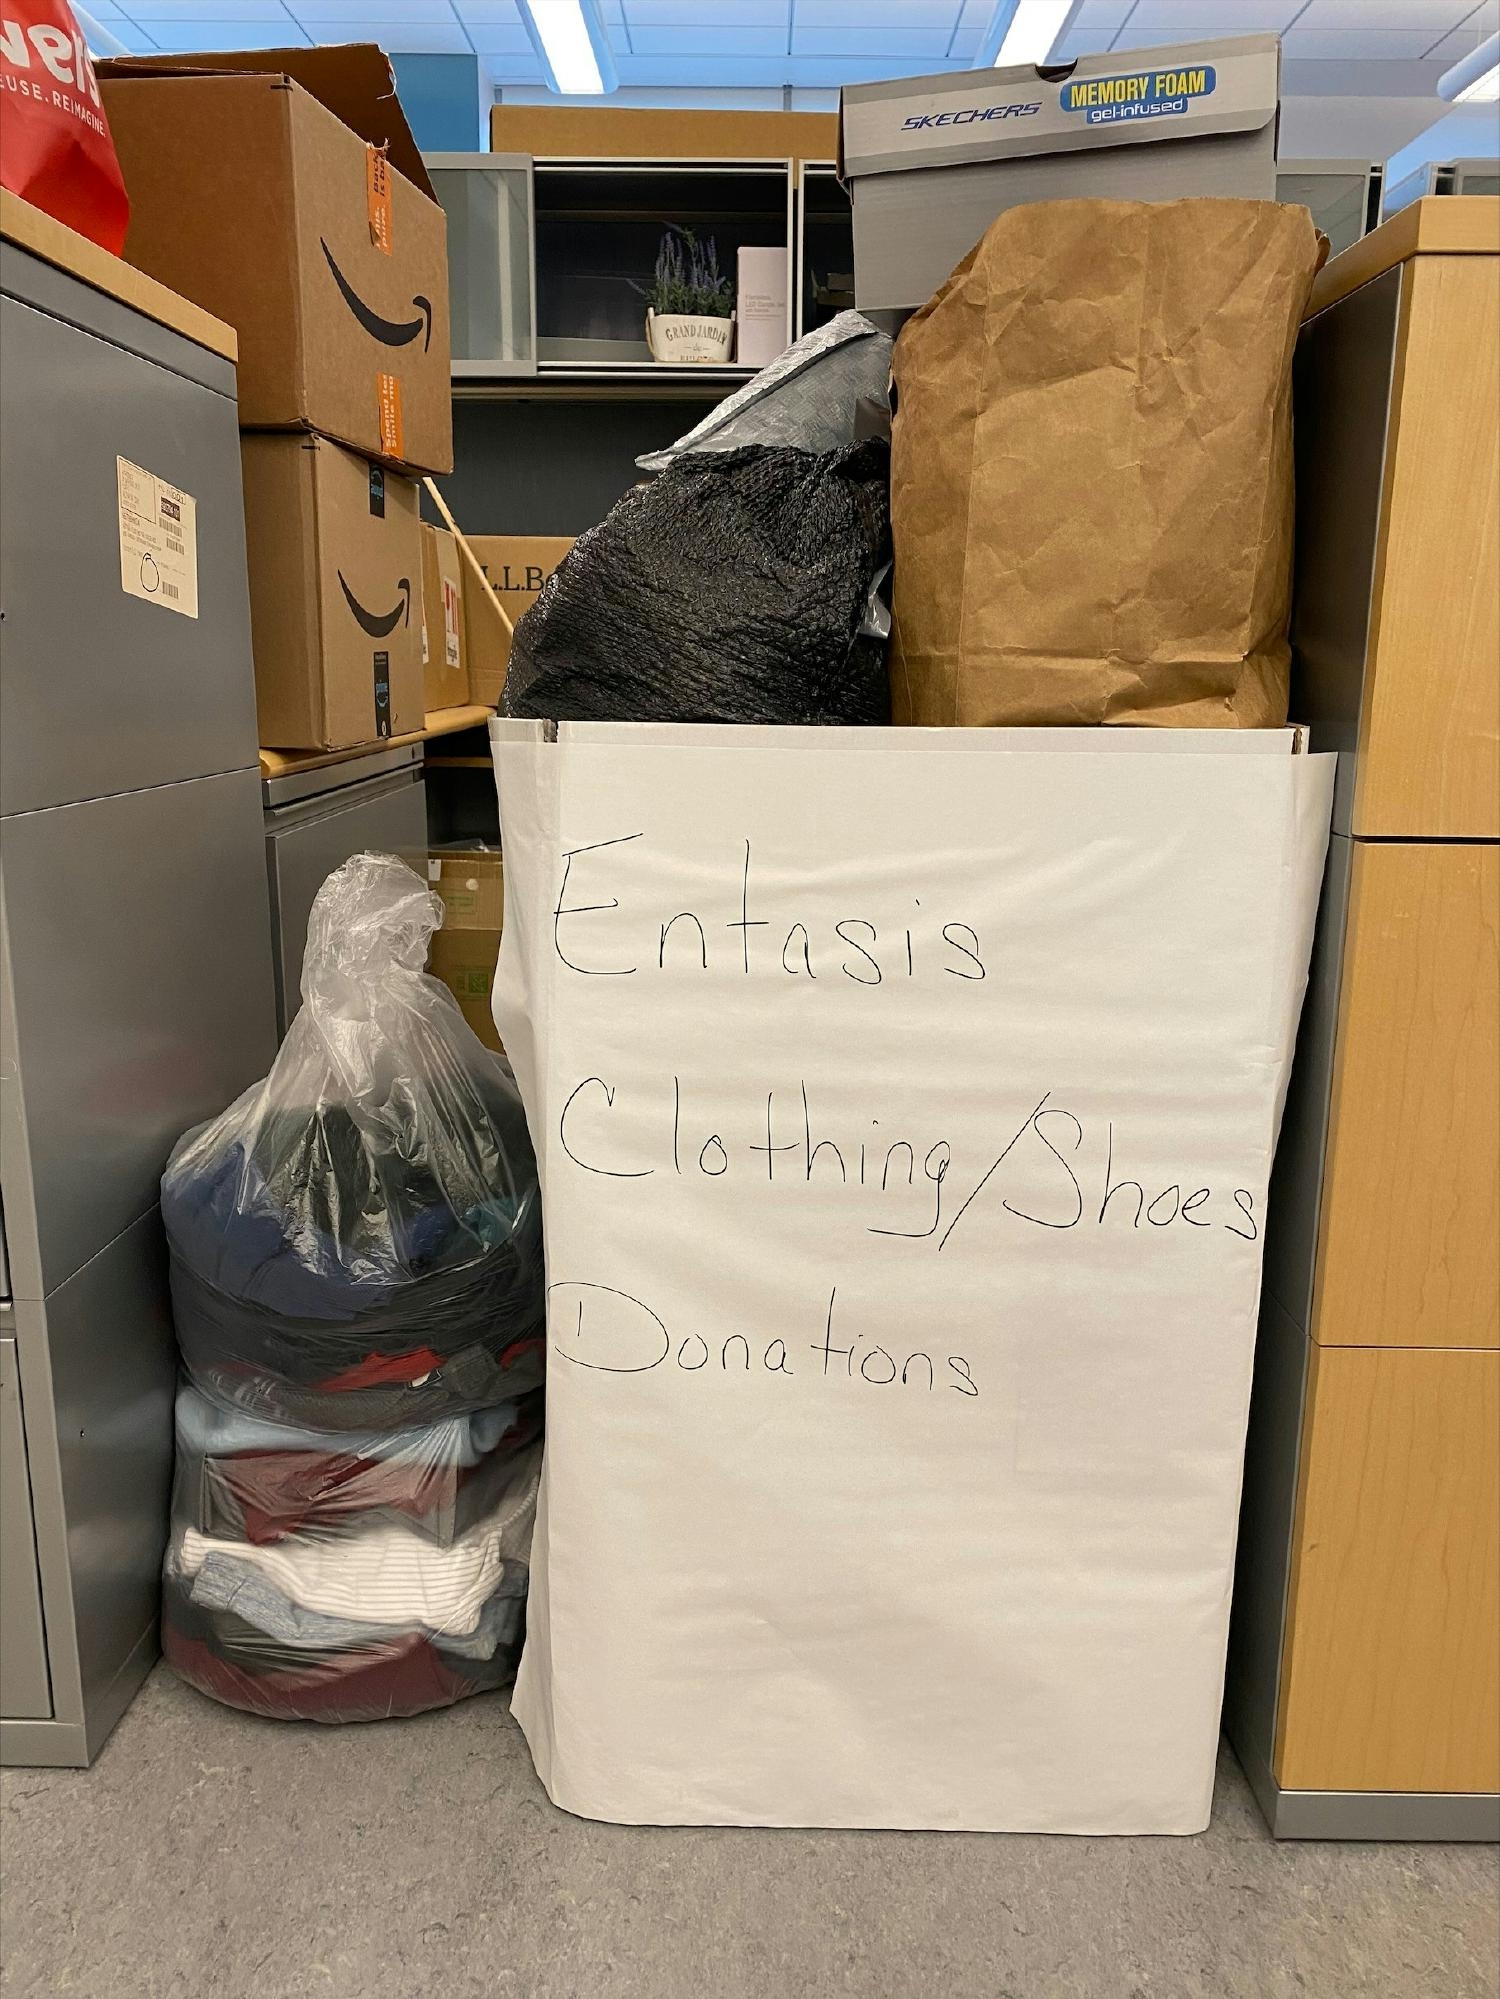 Clothing drive to help those in need